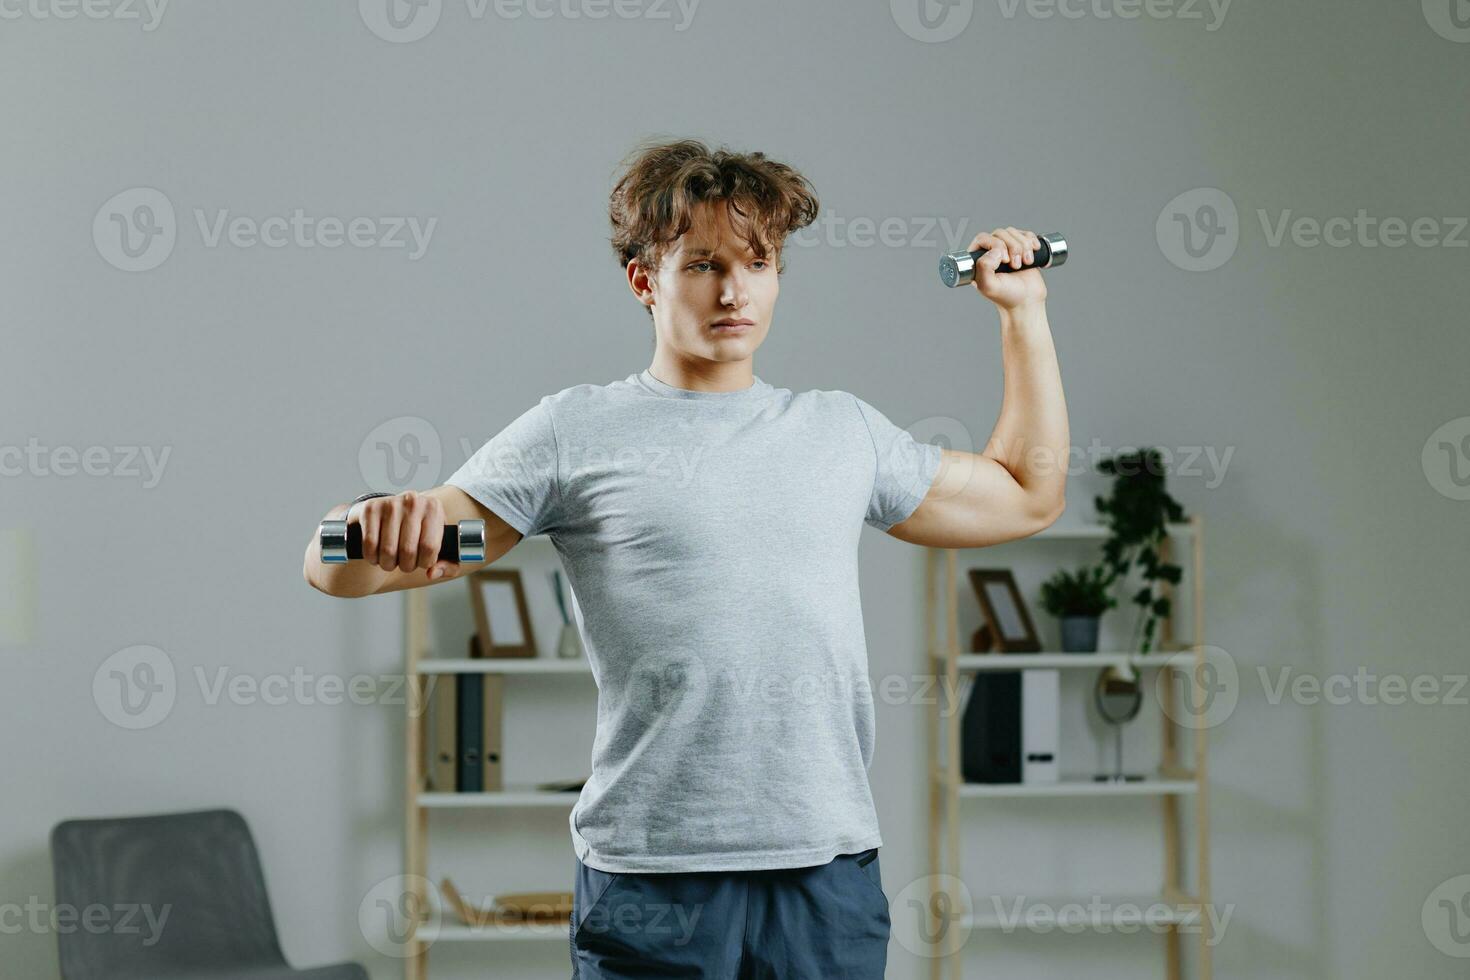 gray man health lifestyle activity exercise training indoor dumbbells home sport photo